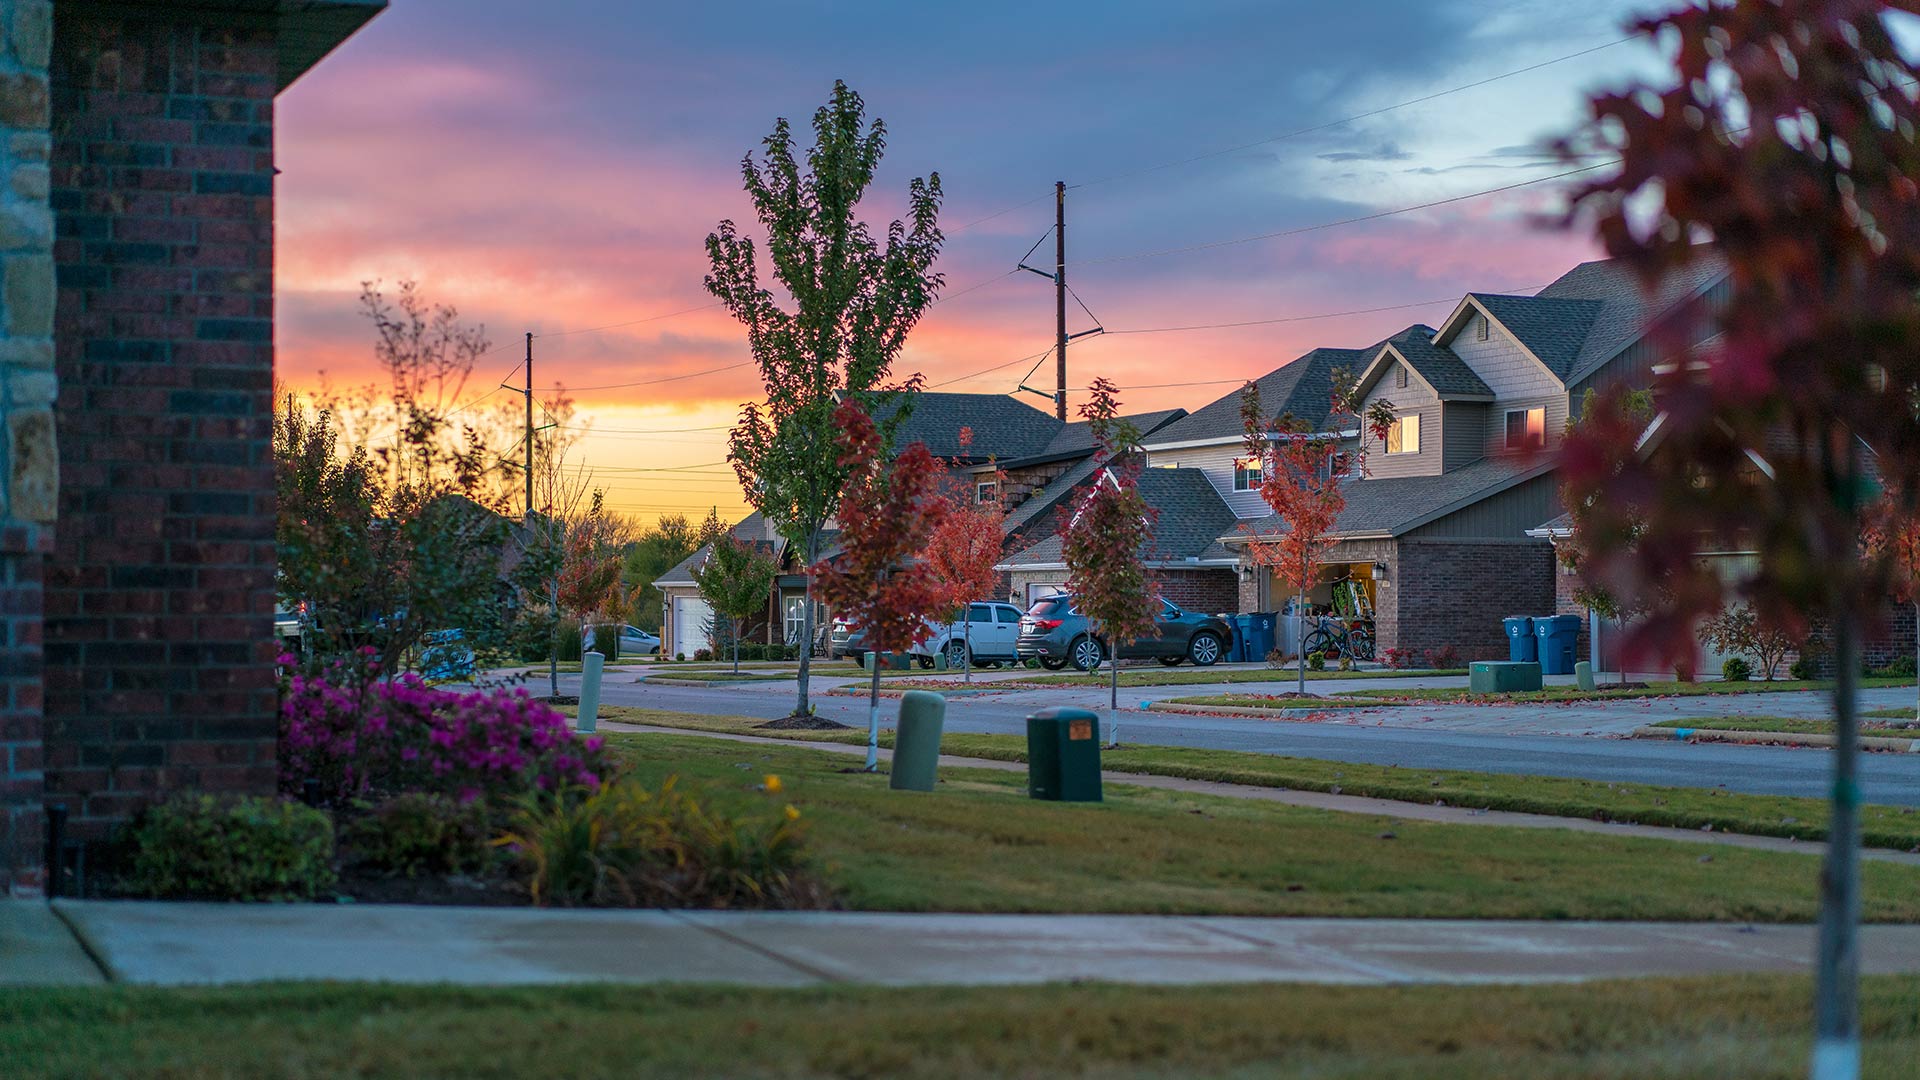 Sunset view from a neighborhood in Haslet, TX.